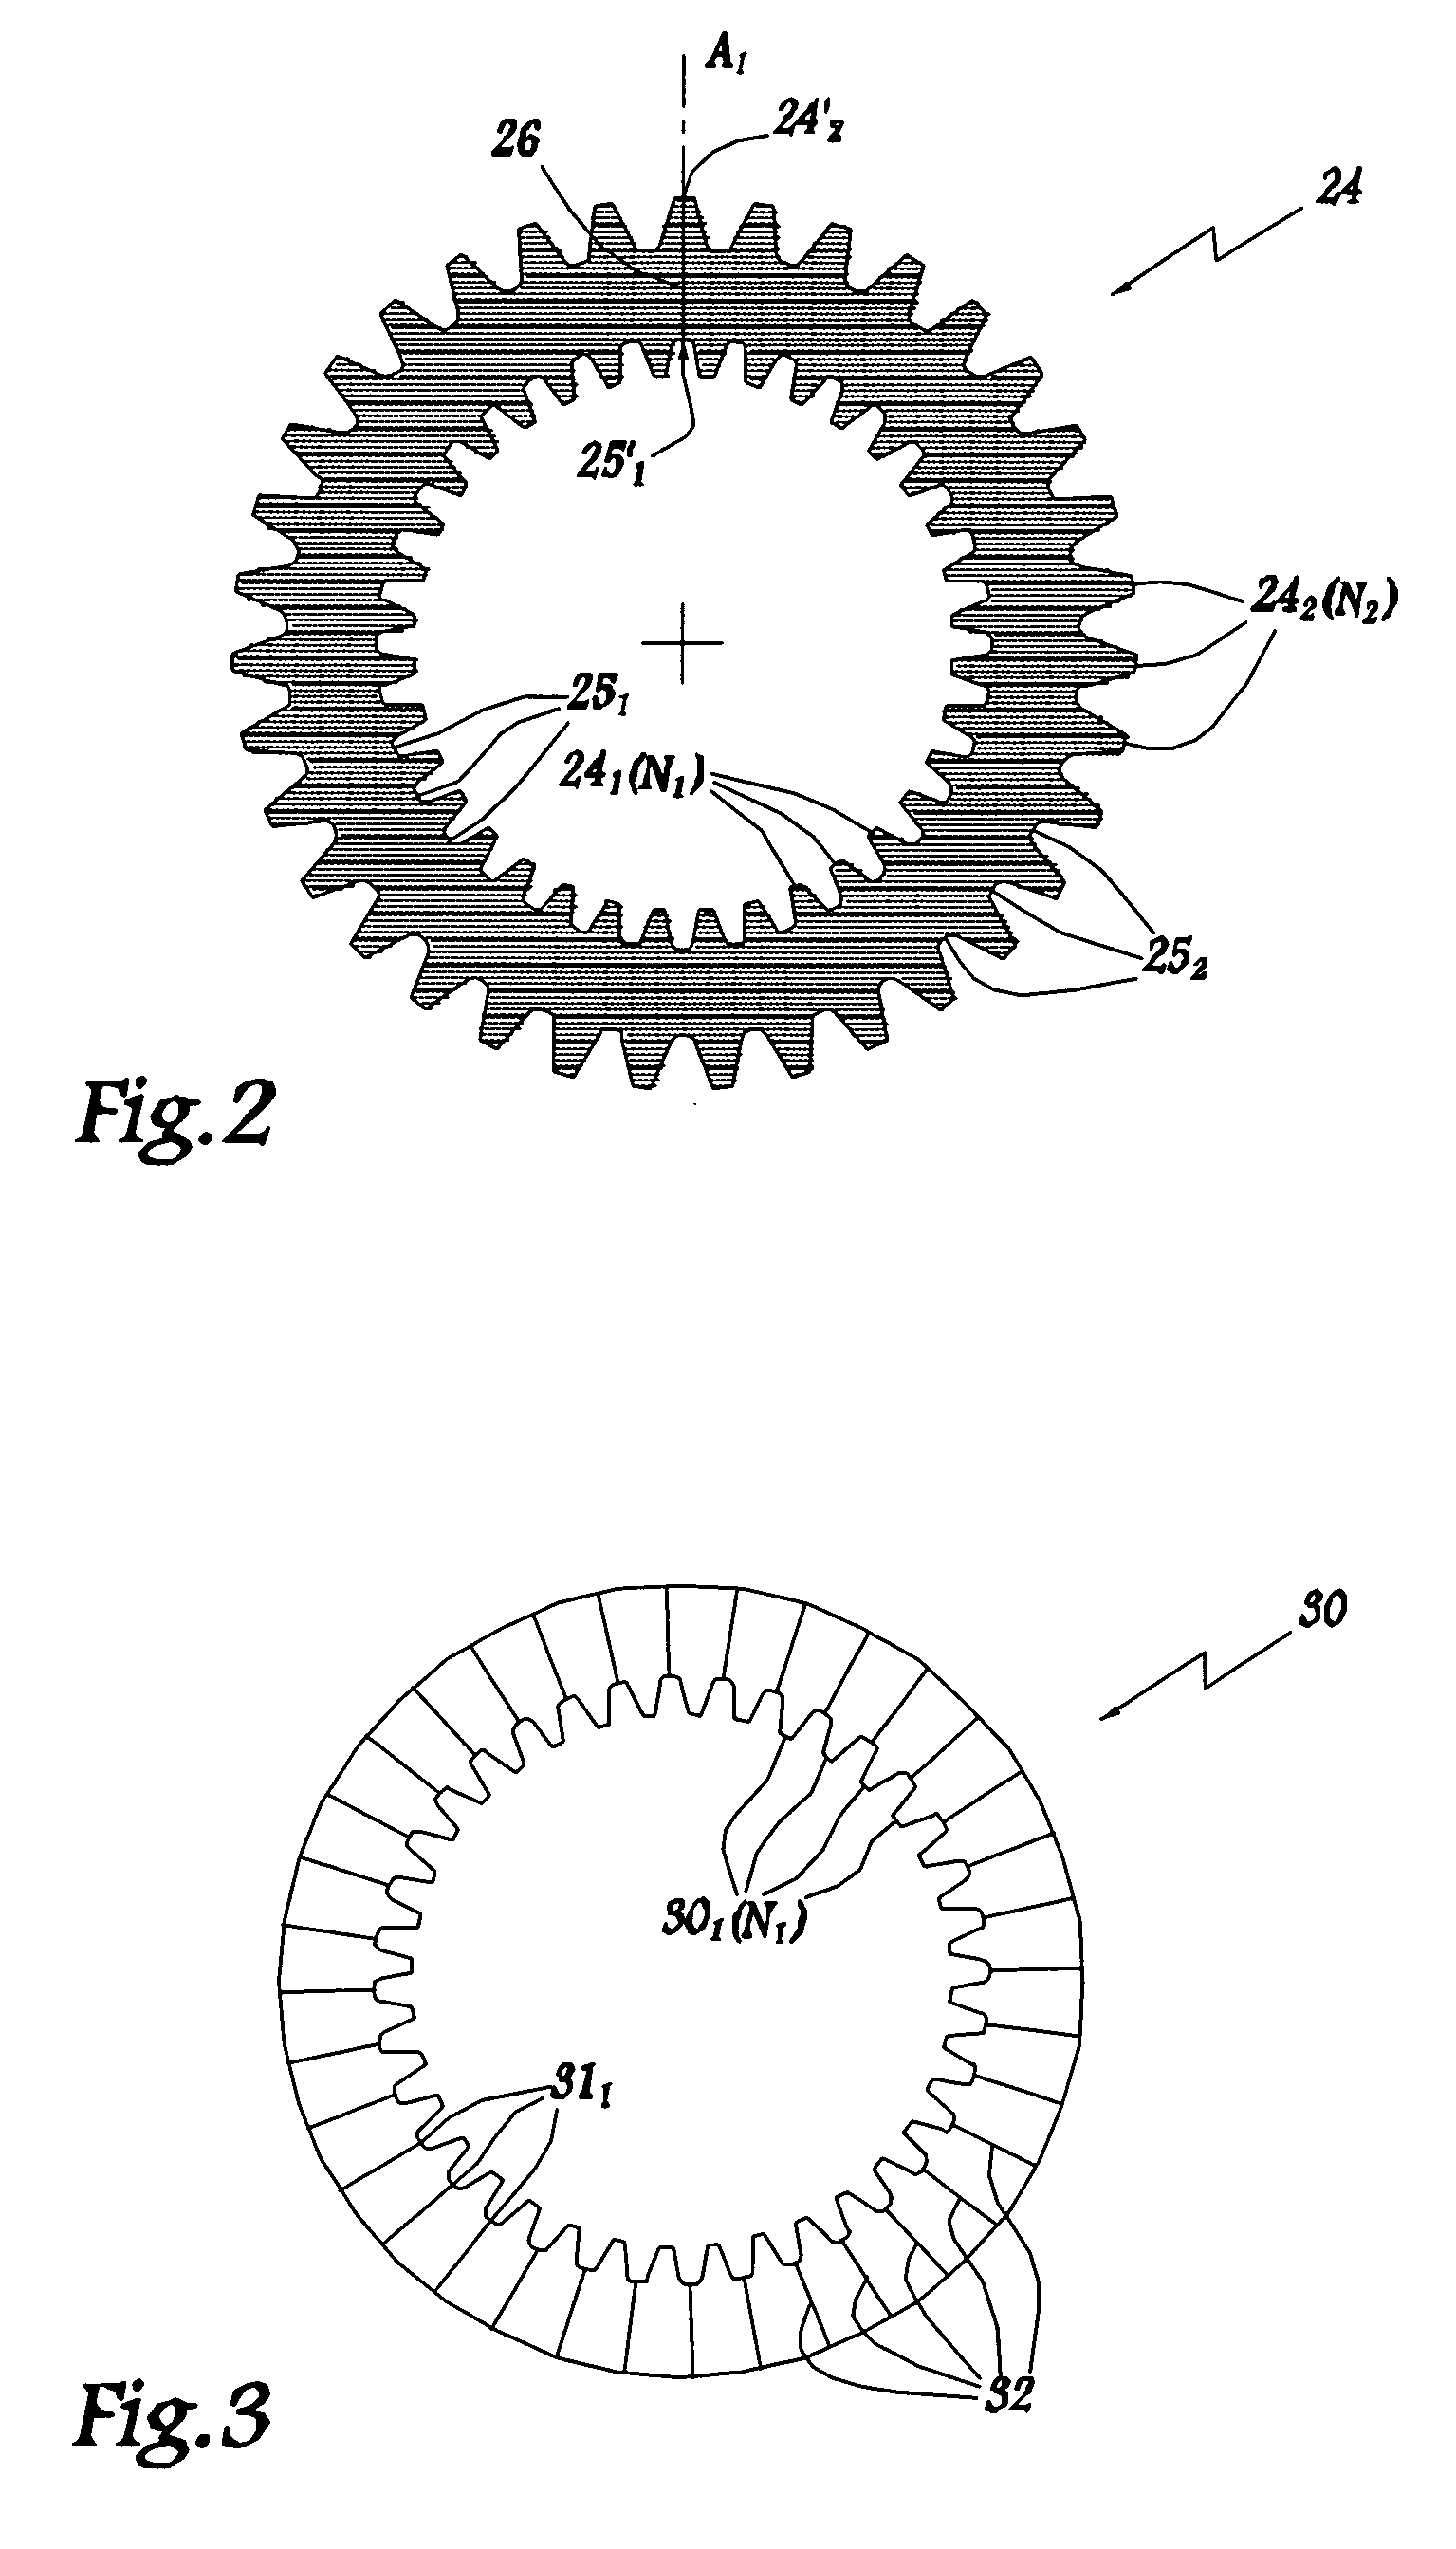 Circuit-breaker comprising a control assembly and an interrupting chamber, a method of assembling it, and an auxiliary member for assembling it